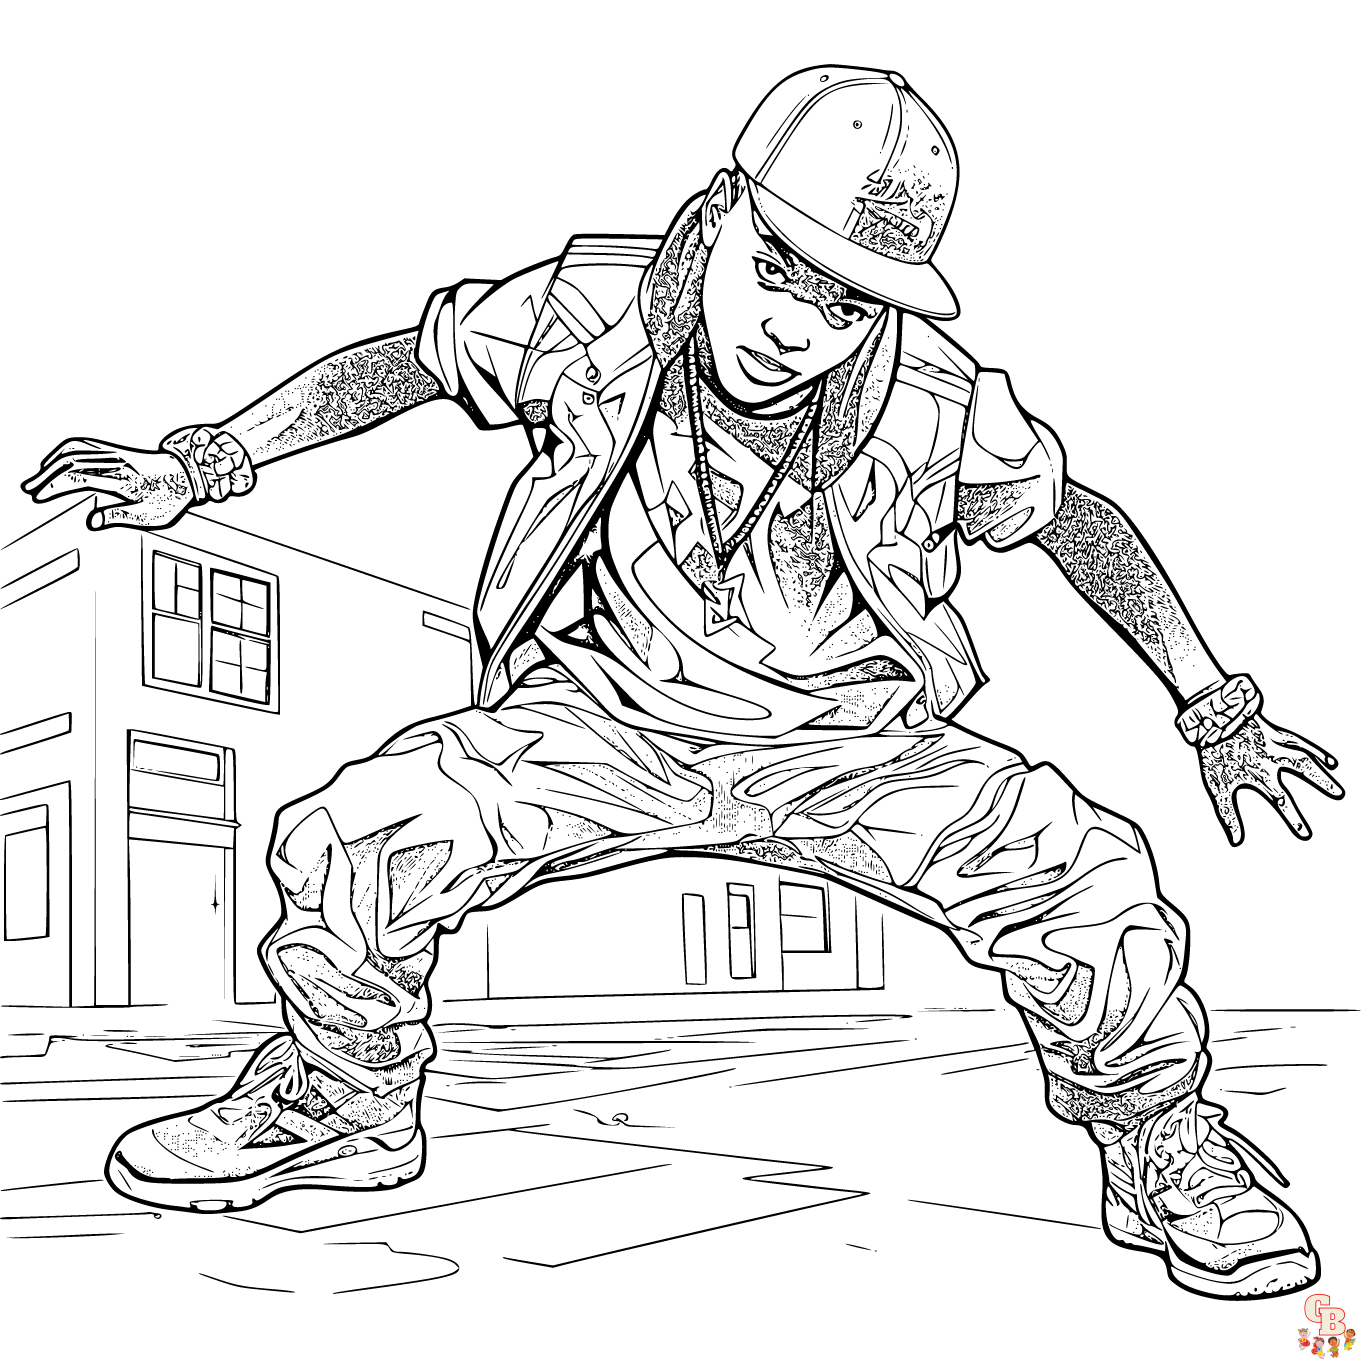 Printable hip hop coloring pages for kids and adults